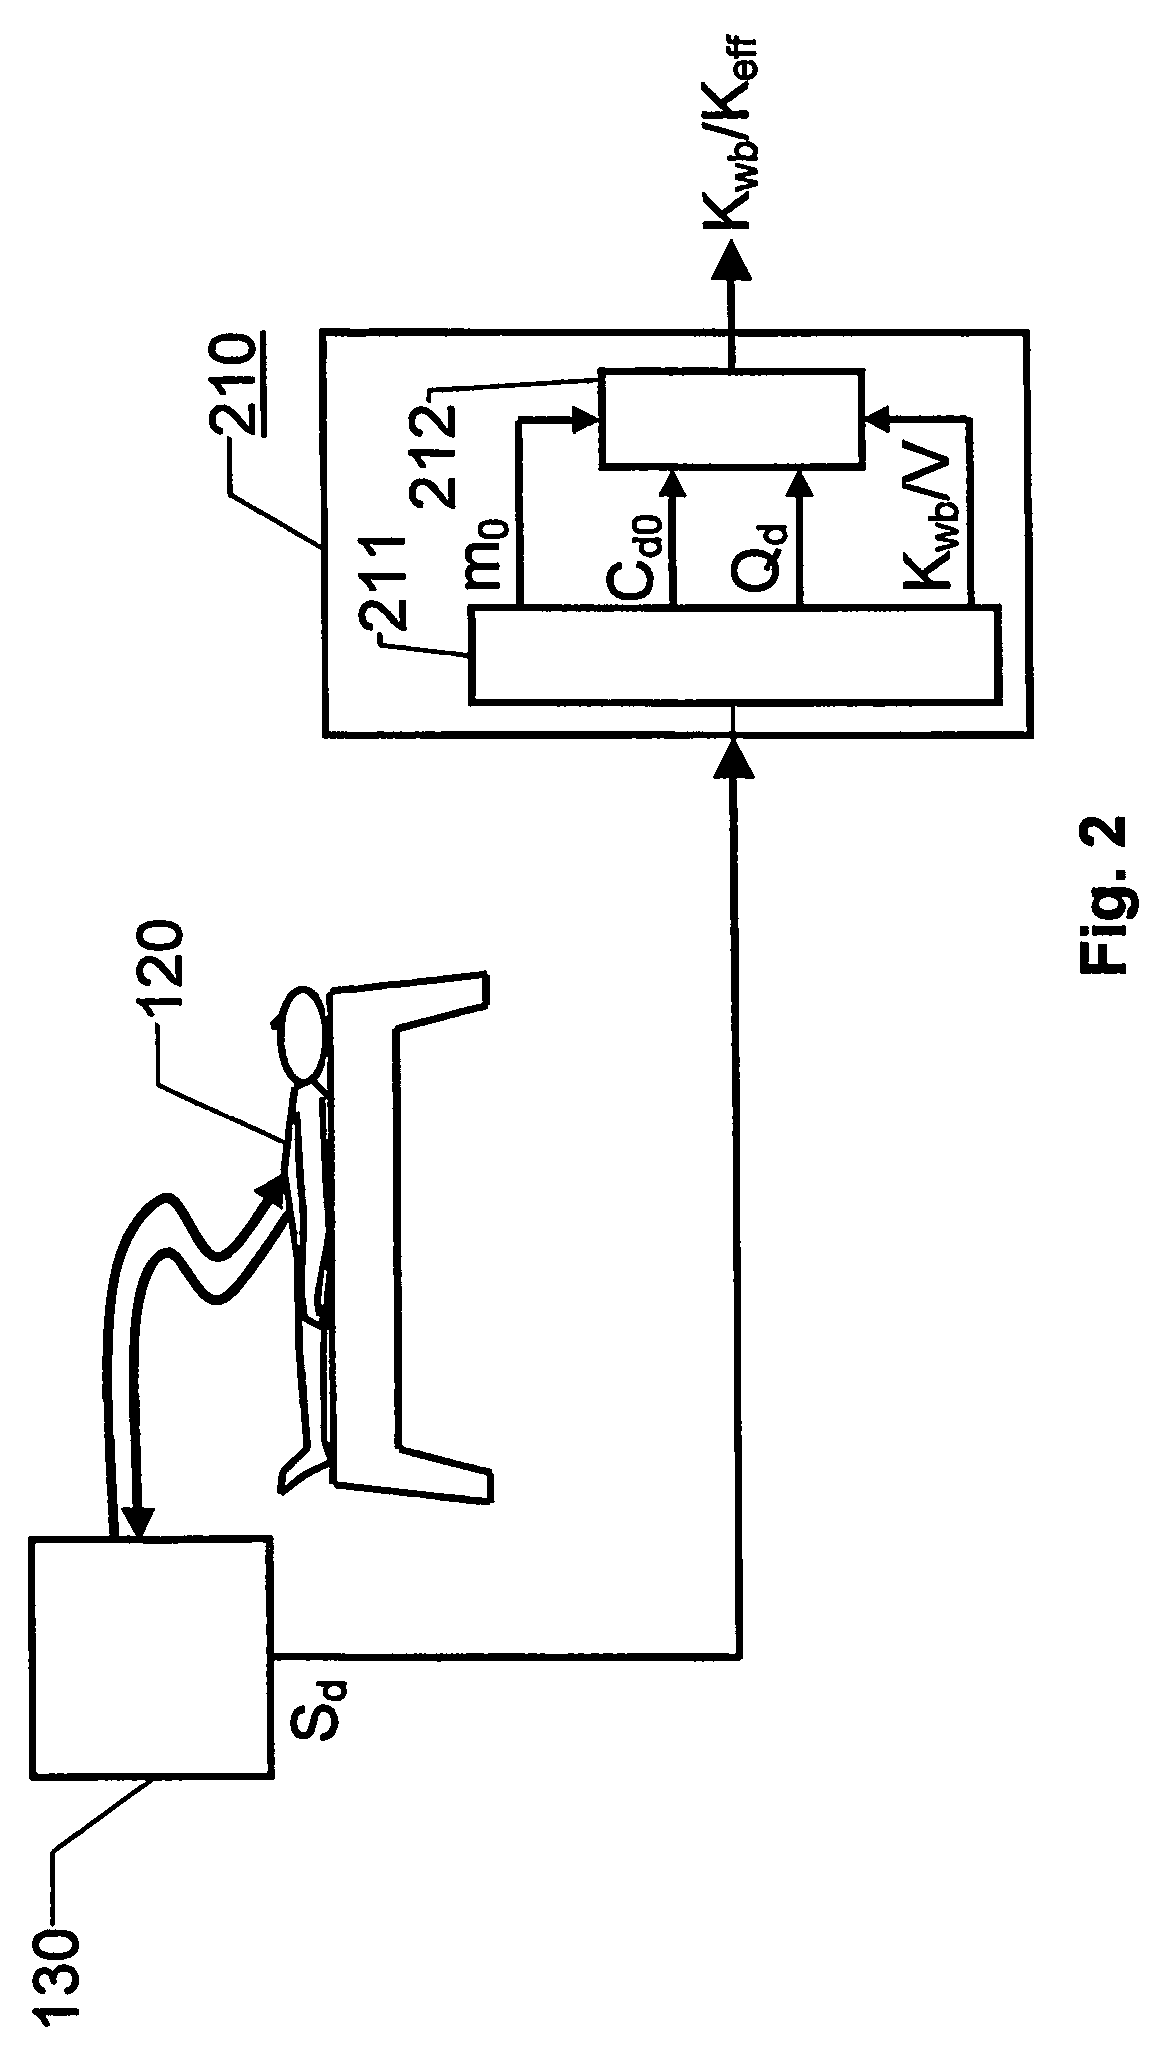 Method and an apparatus for determining the efficiency of dialysis